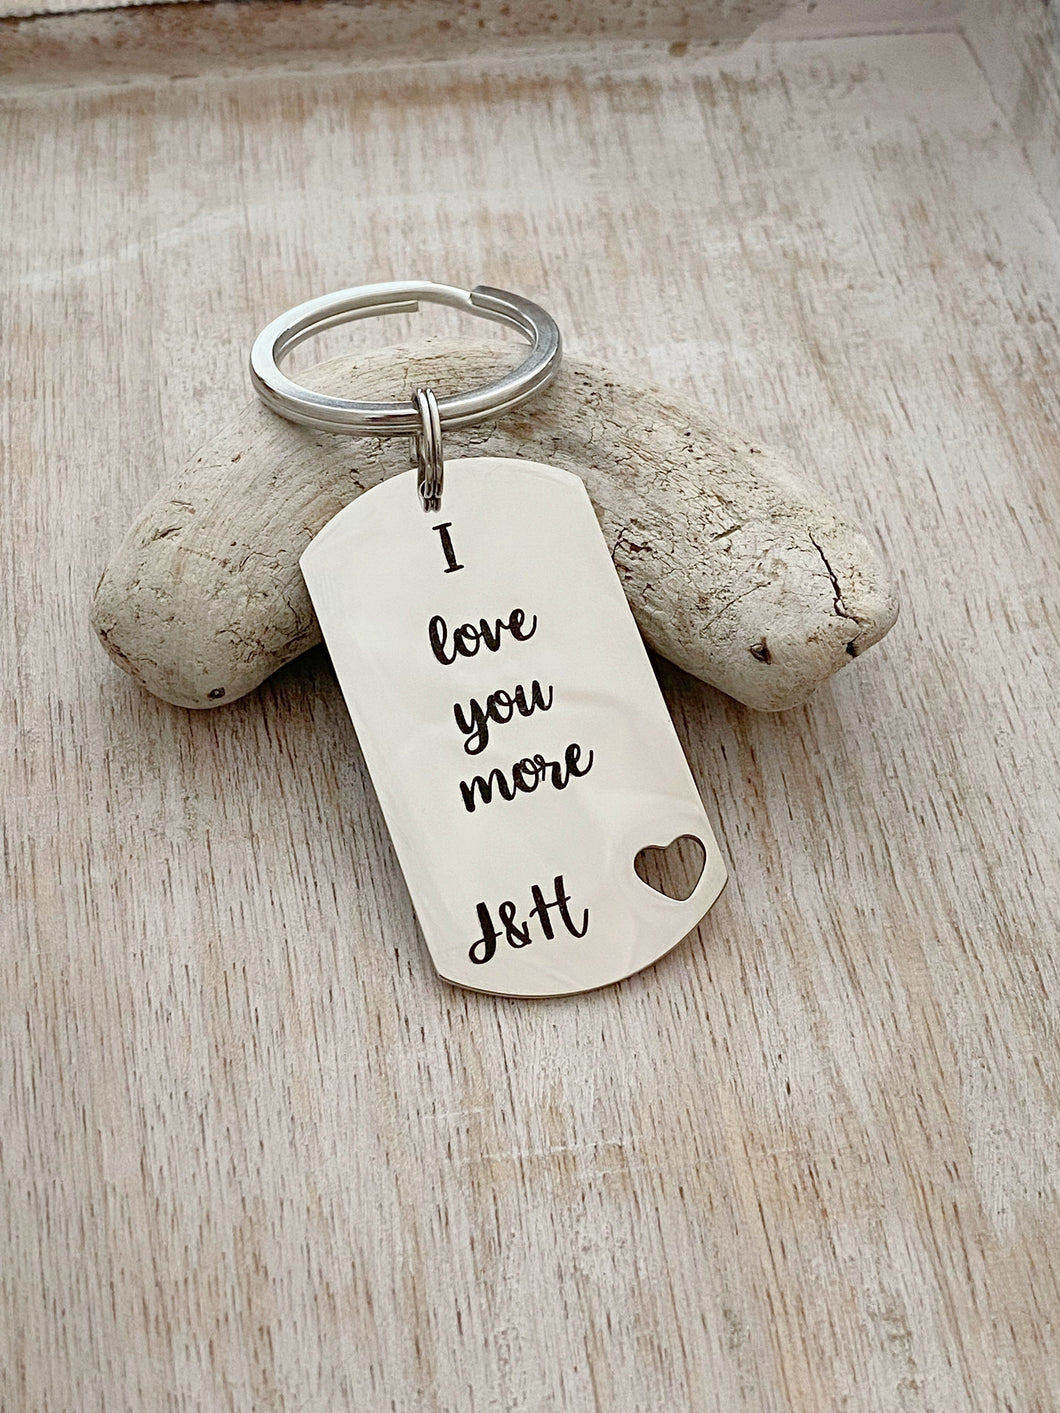 I love you more - stainless steel dog tag keychain with heart - personalized engraved with two initials - Valentine's Day gift for him